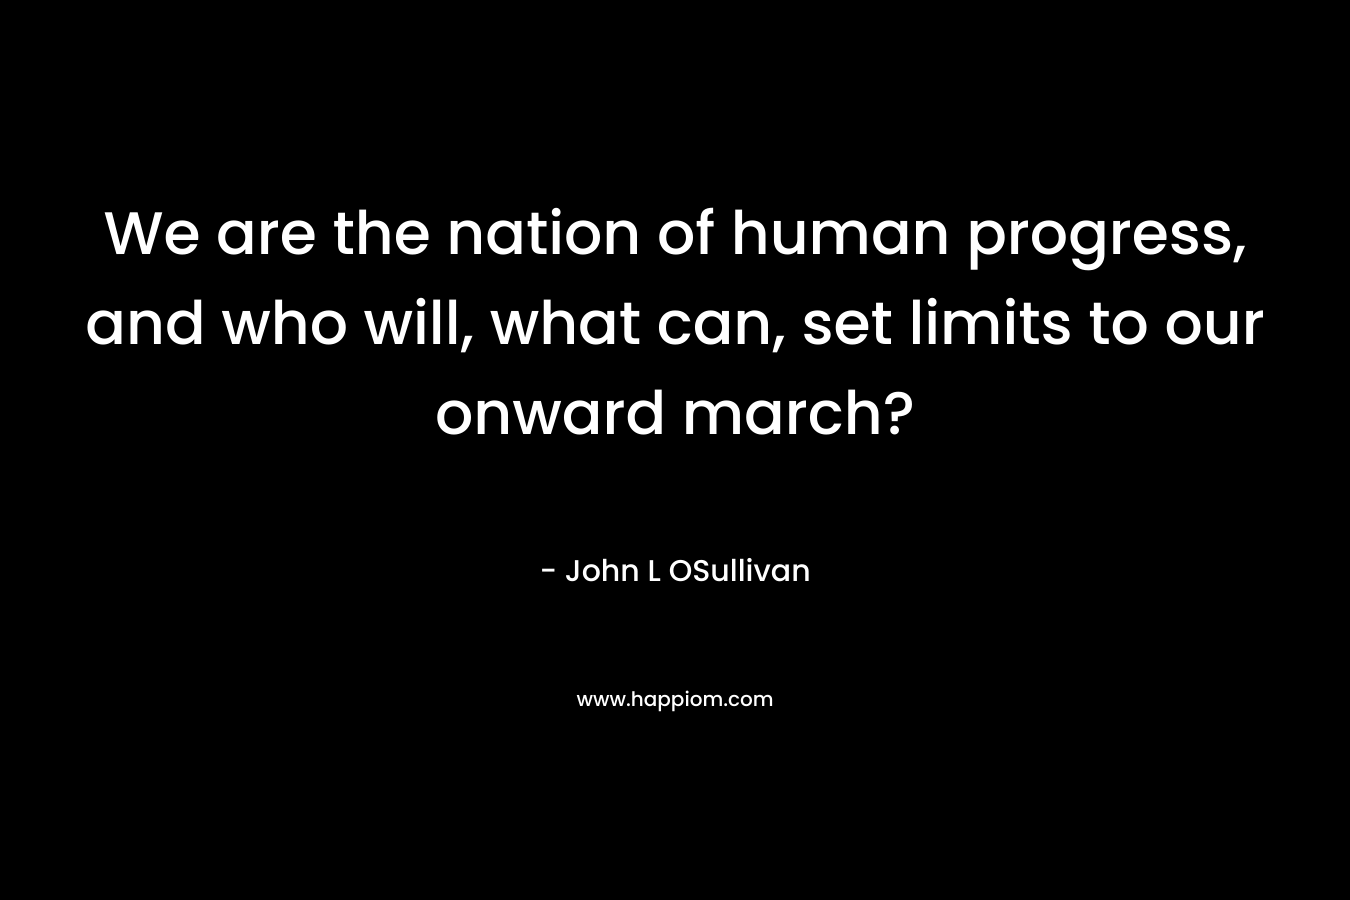 We are the nation of human progress, and who will, what can, set limits to our onward march? – John L OSullivan